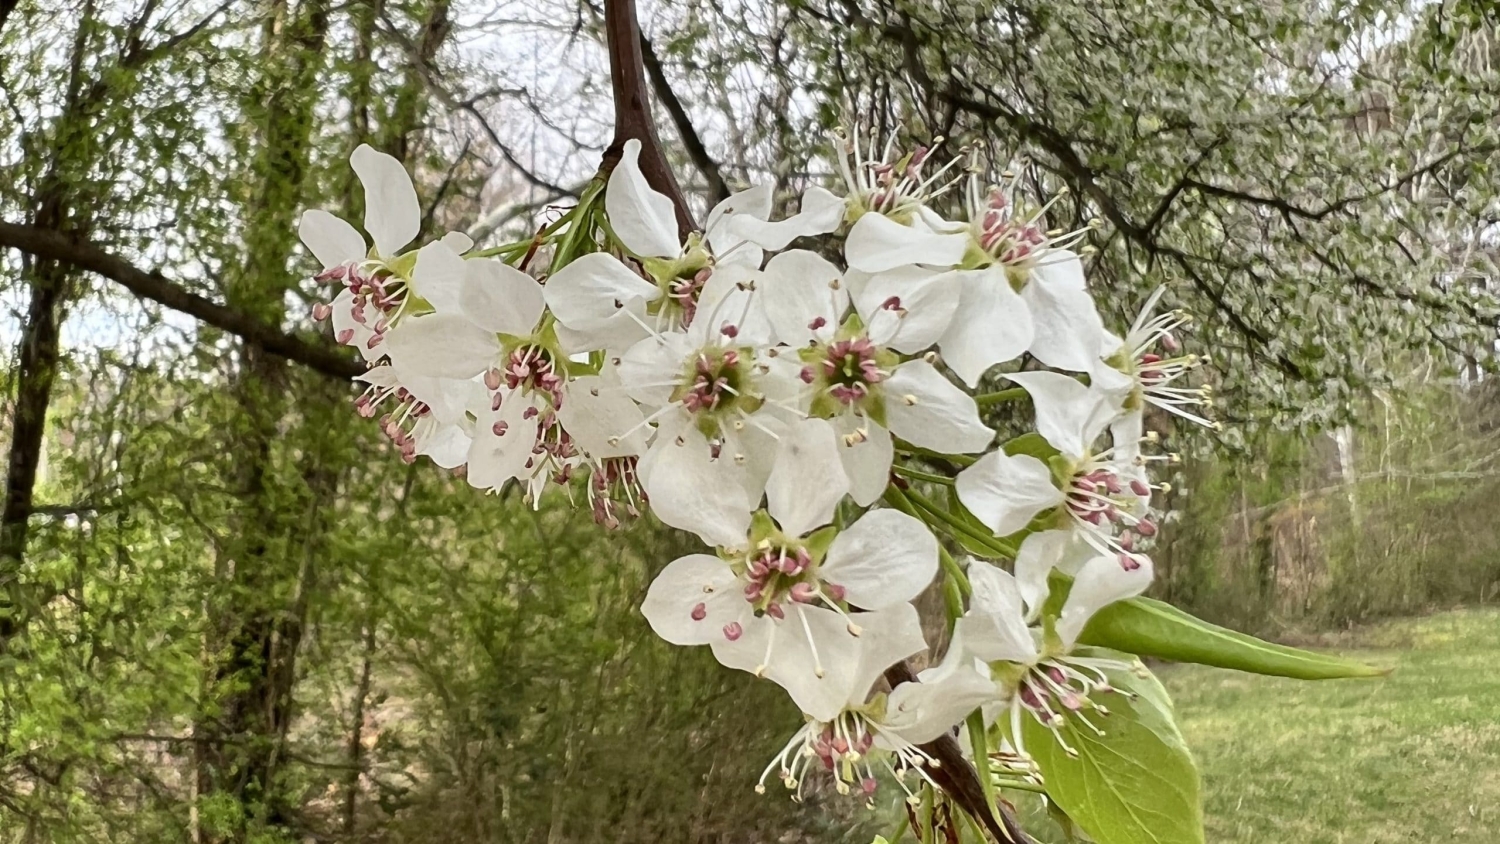 Bradford pear tree in bloom - Bounty Offered on Bradford Pear Trees - College of Natural Resources News NC State University